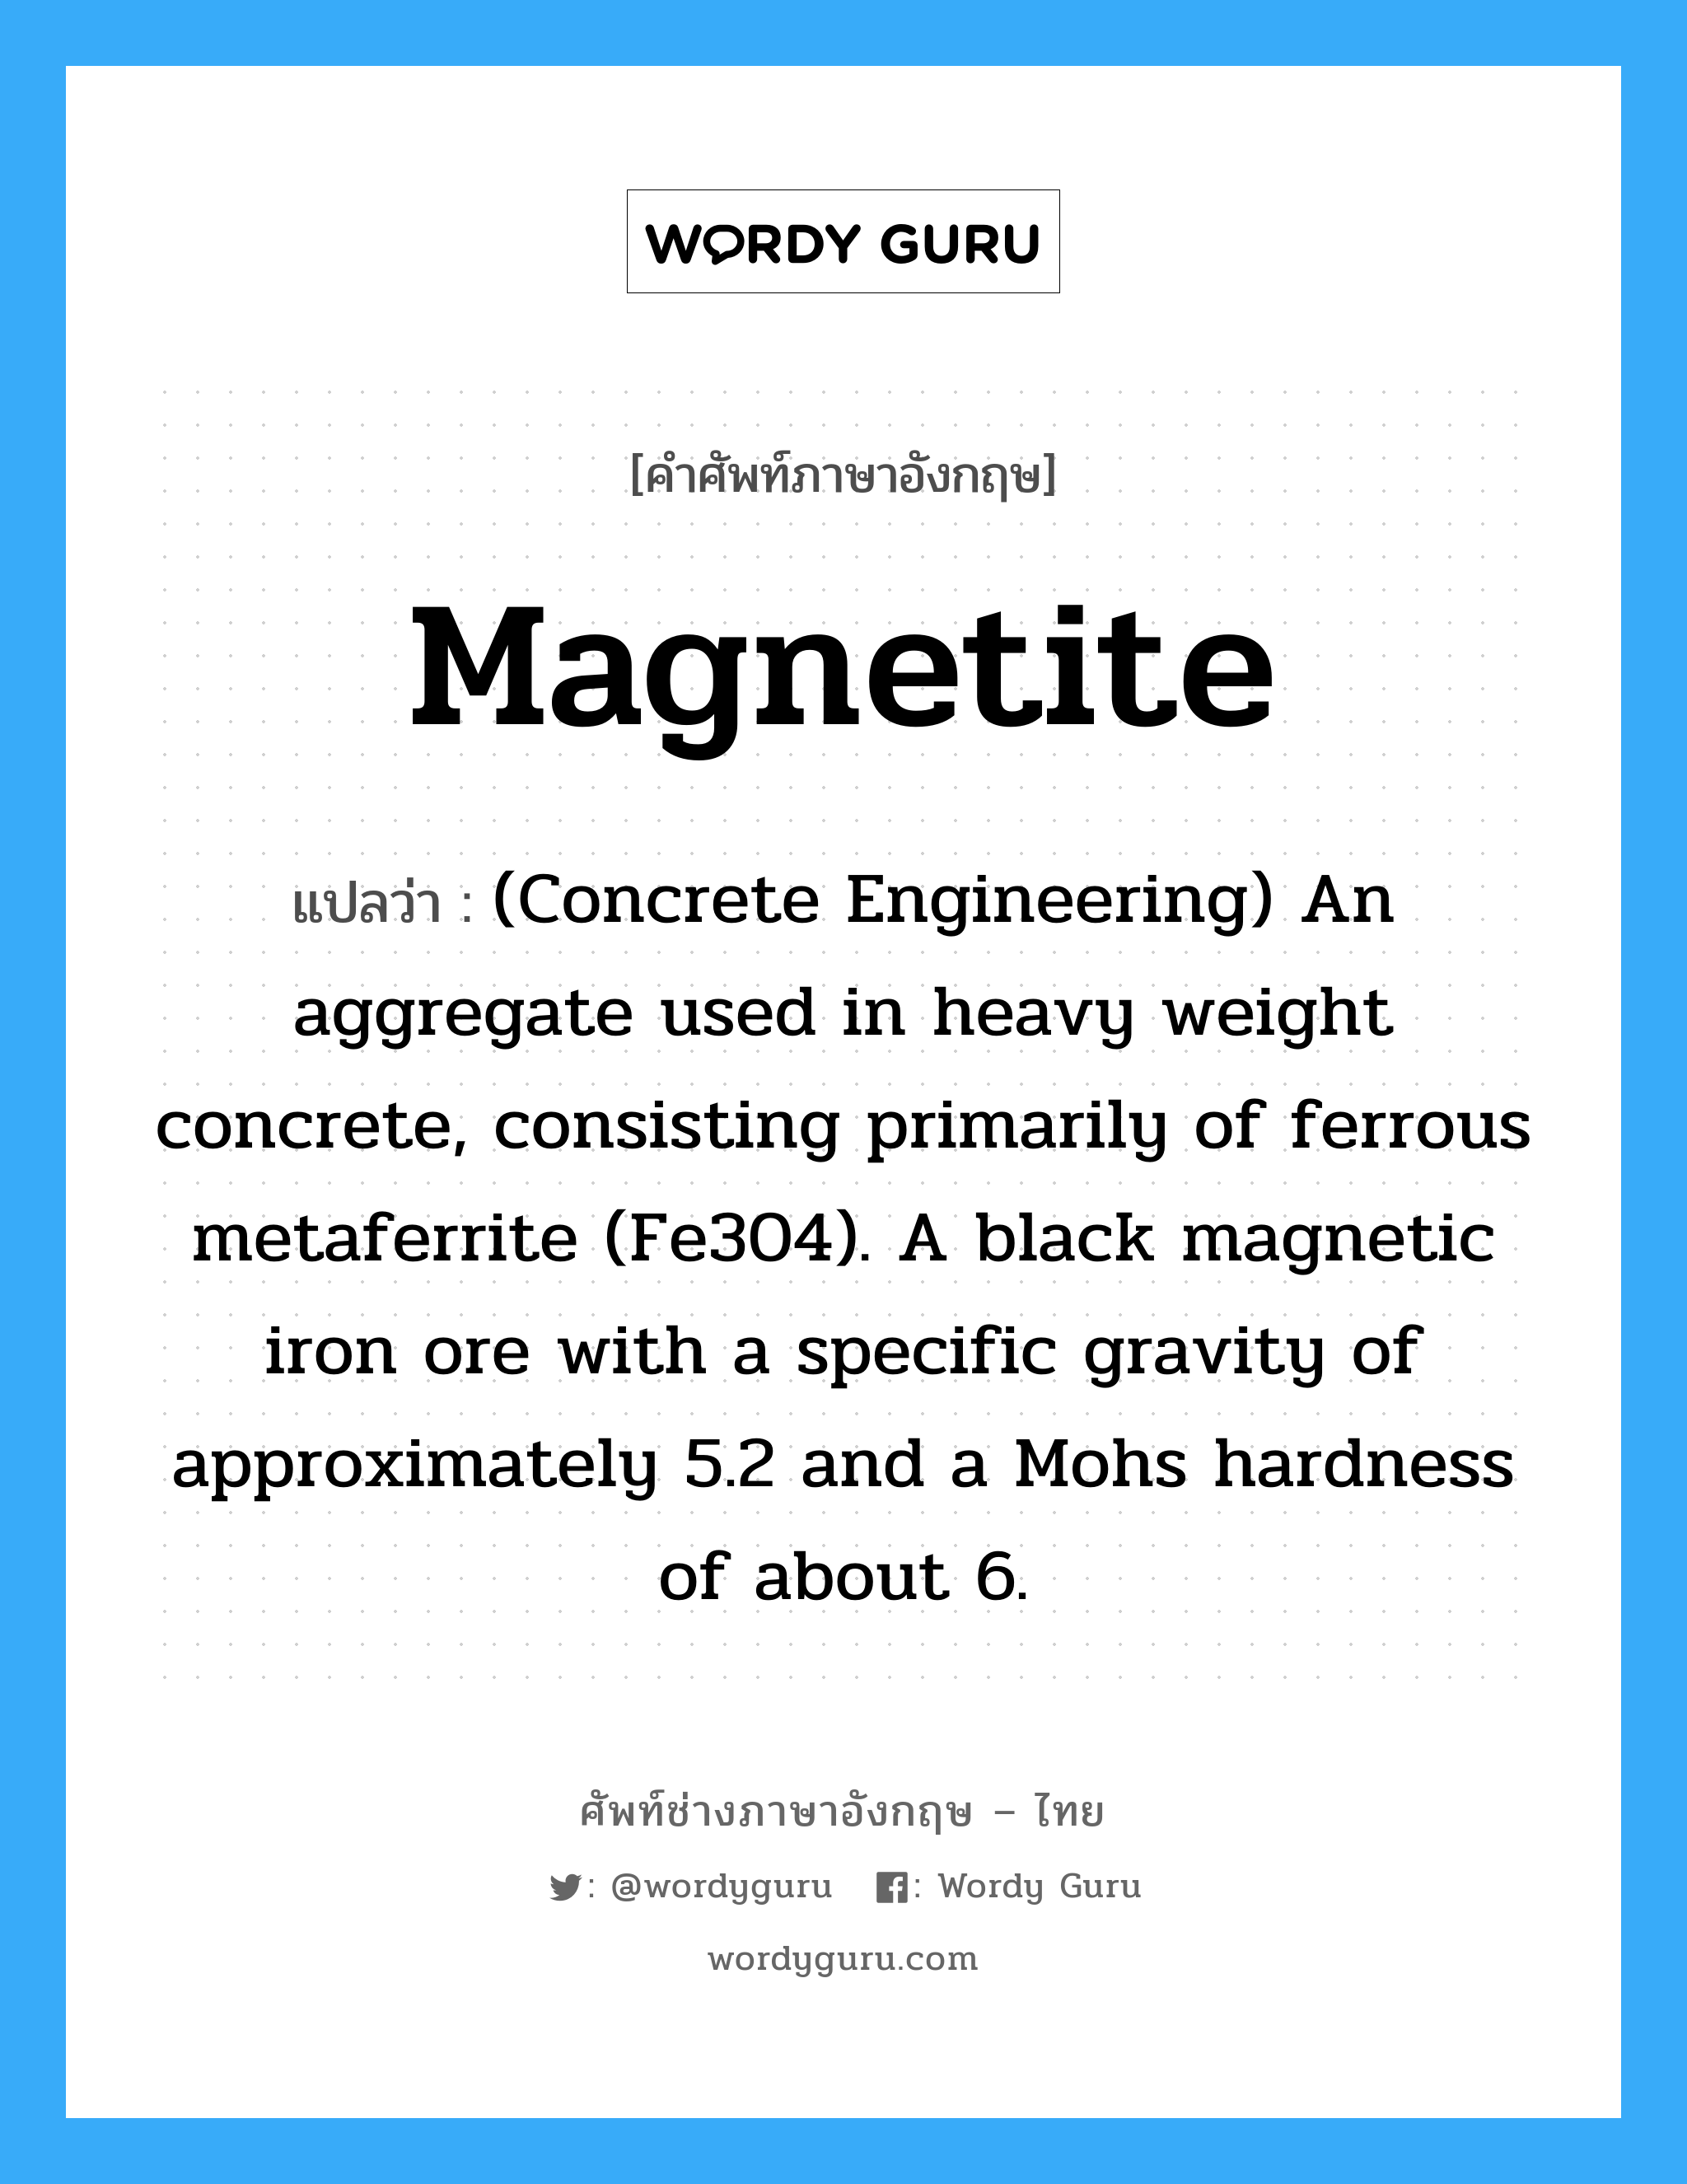 Magnetite แปลว่า?, คำศัพท์ช่างภาษาอังกฤษ - ไทย Magnetite คำศัพท์ภาษาอังกฤษ Magnetite แปลว่า (Concrete Engineering) An aggregate used in heavy weight concrete, consisting primarily of ferrous metaferrite (Fe304). A black magnetic iron ore with a specific gravity of approximately 5.2 and a Mohs hardness of about 6.